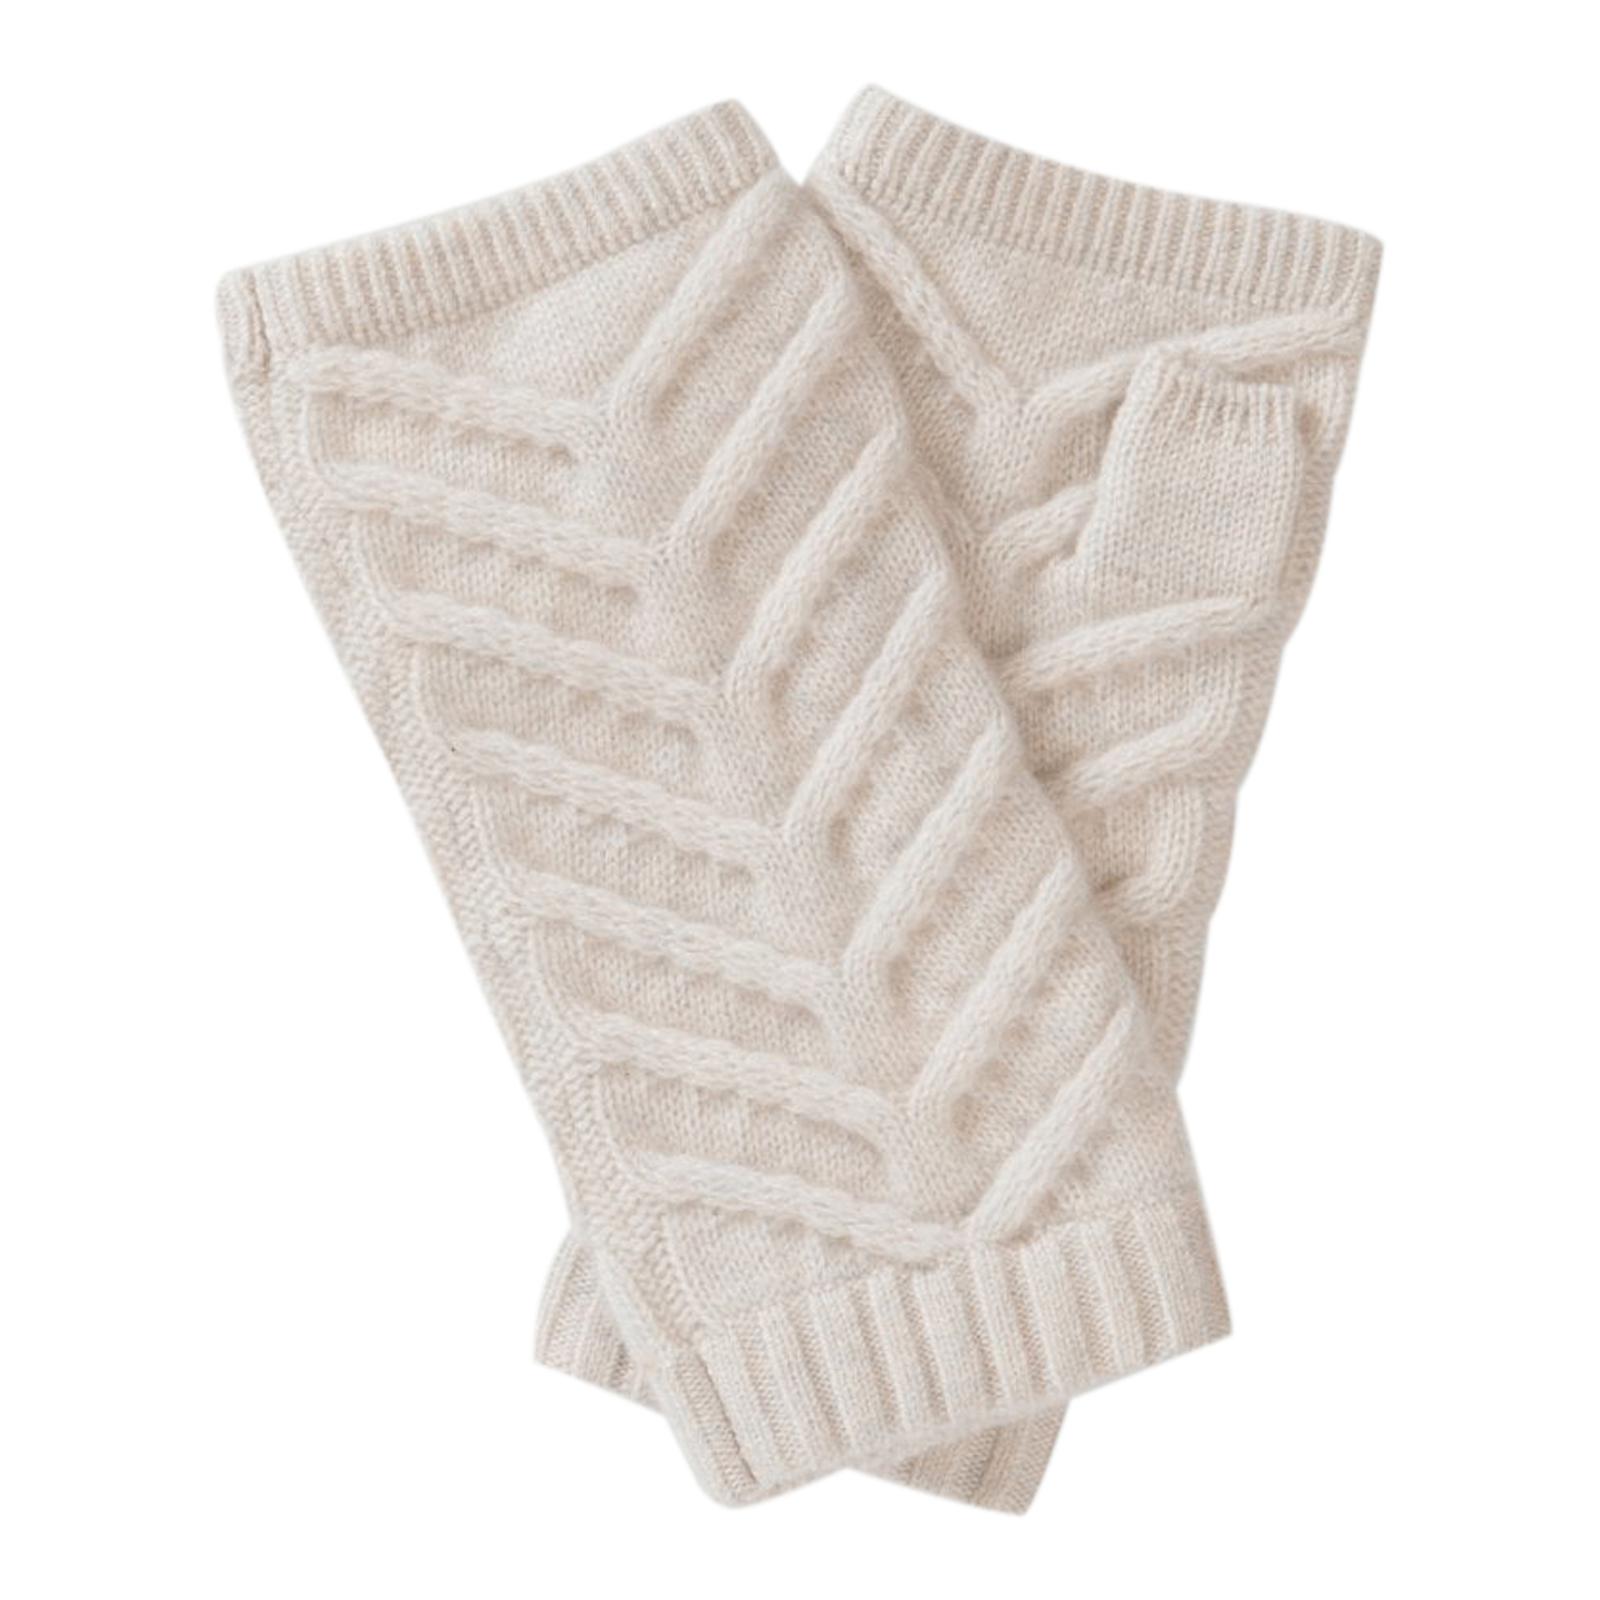 Alpine White Organic Cashmere Cable Mitts - BrandAlley